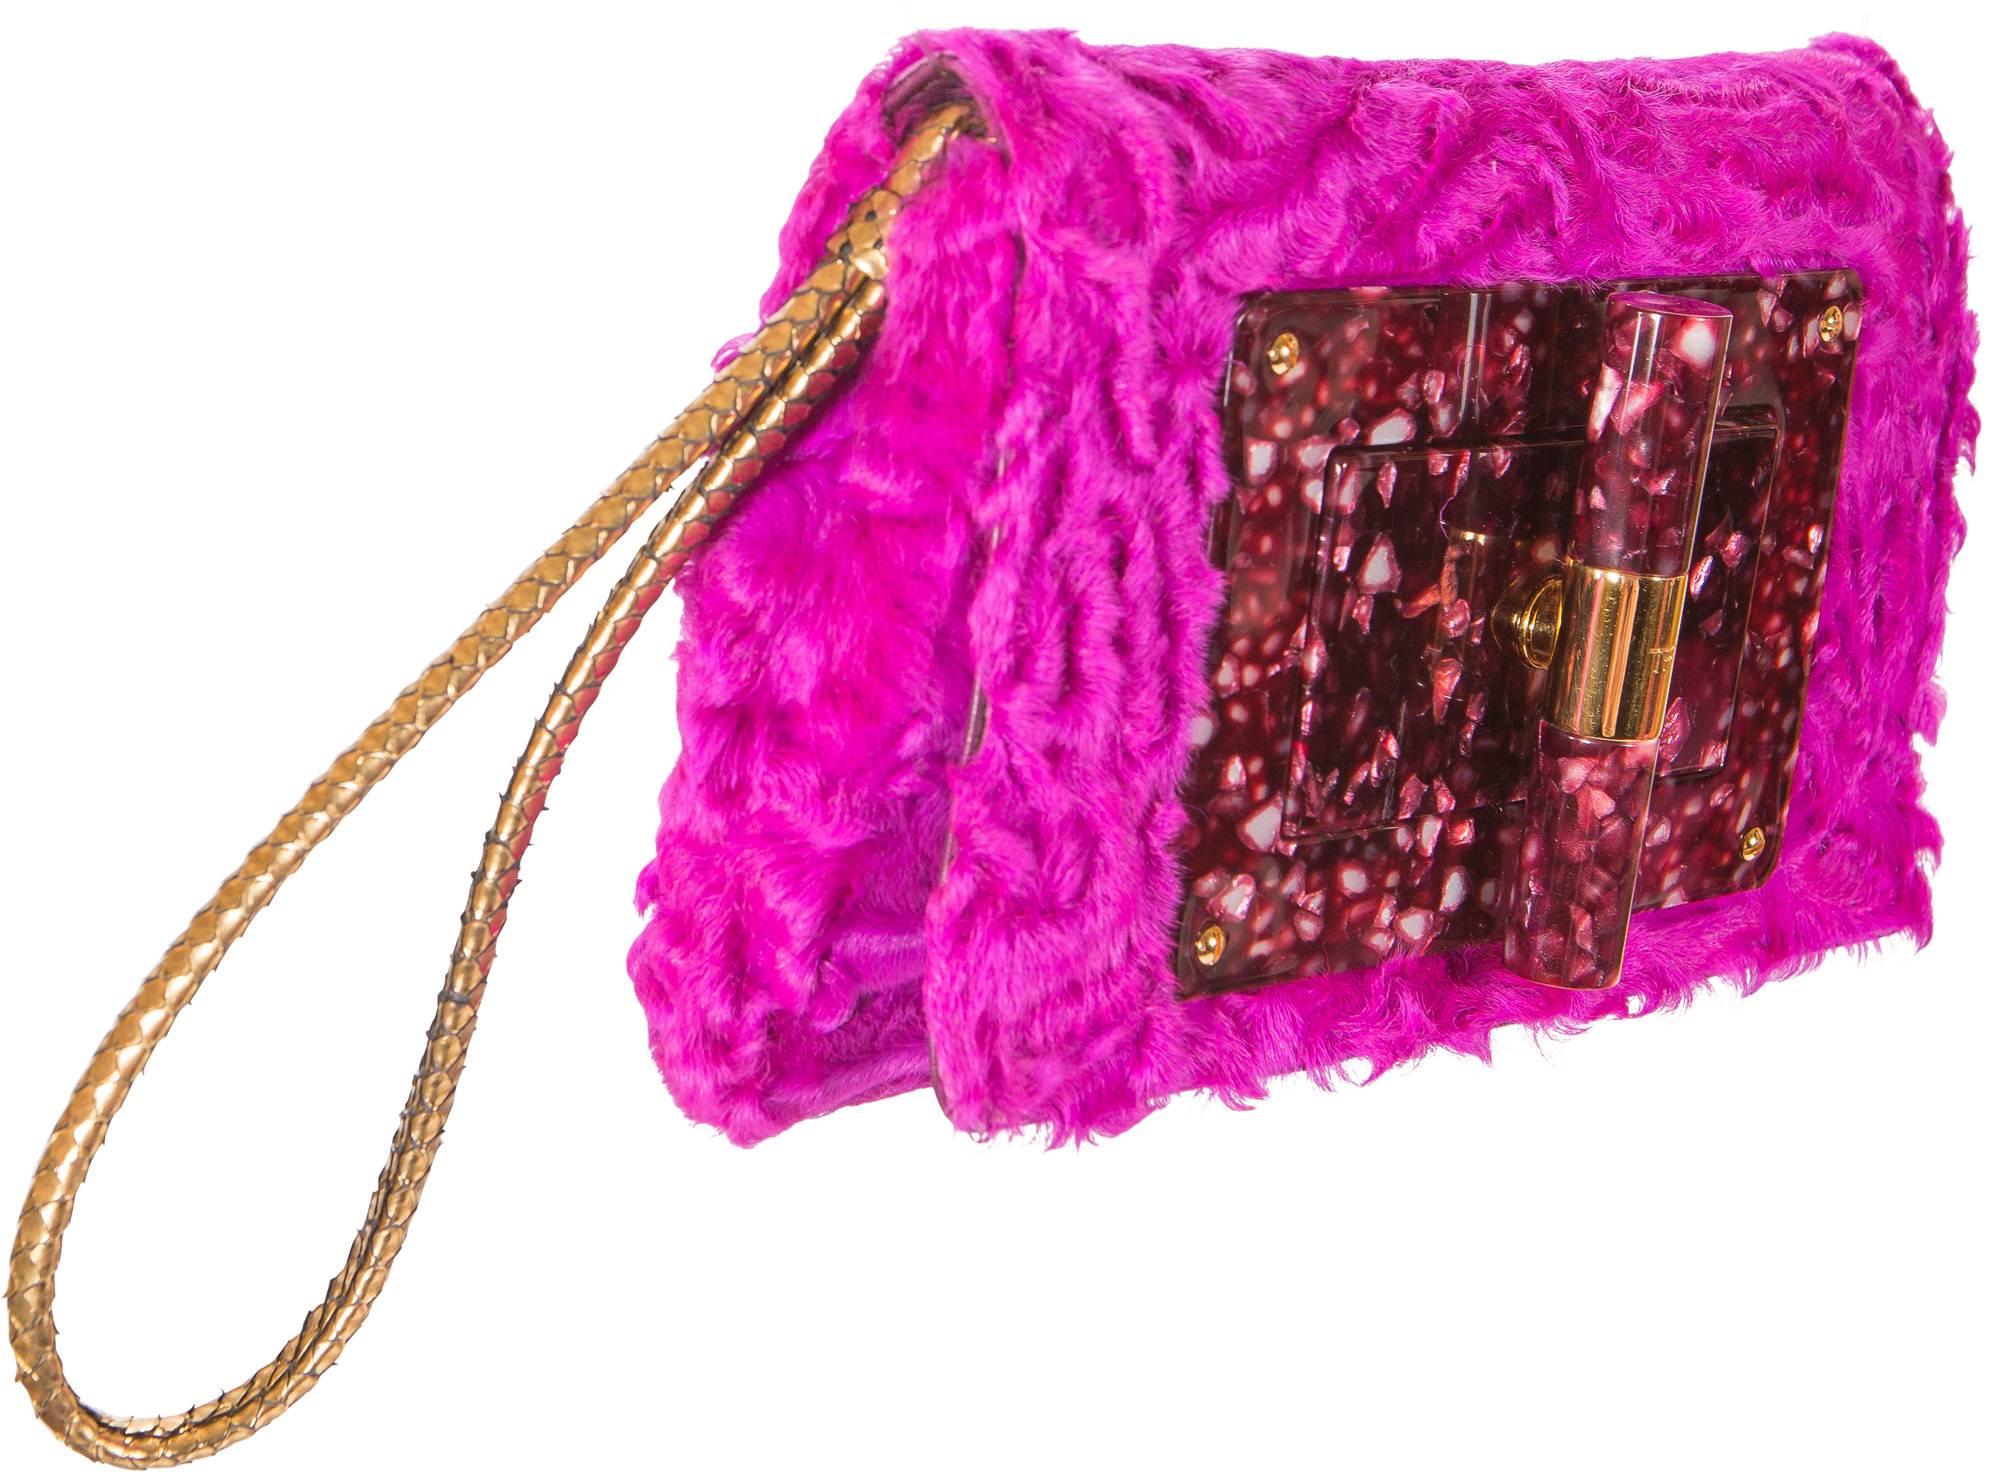 Fuchsia Astrakhan or Broadtail fur Tom Ford Natalia bag 
Gold-tone hardware with gold snake skin strap.
Burgandy lucite detail at front.
Single pocket at back.
Silk interior lining. 
Turn-lock closure at front face.  

RRP $19,500